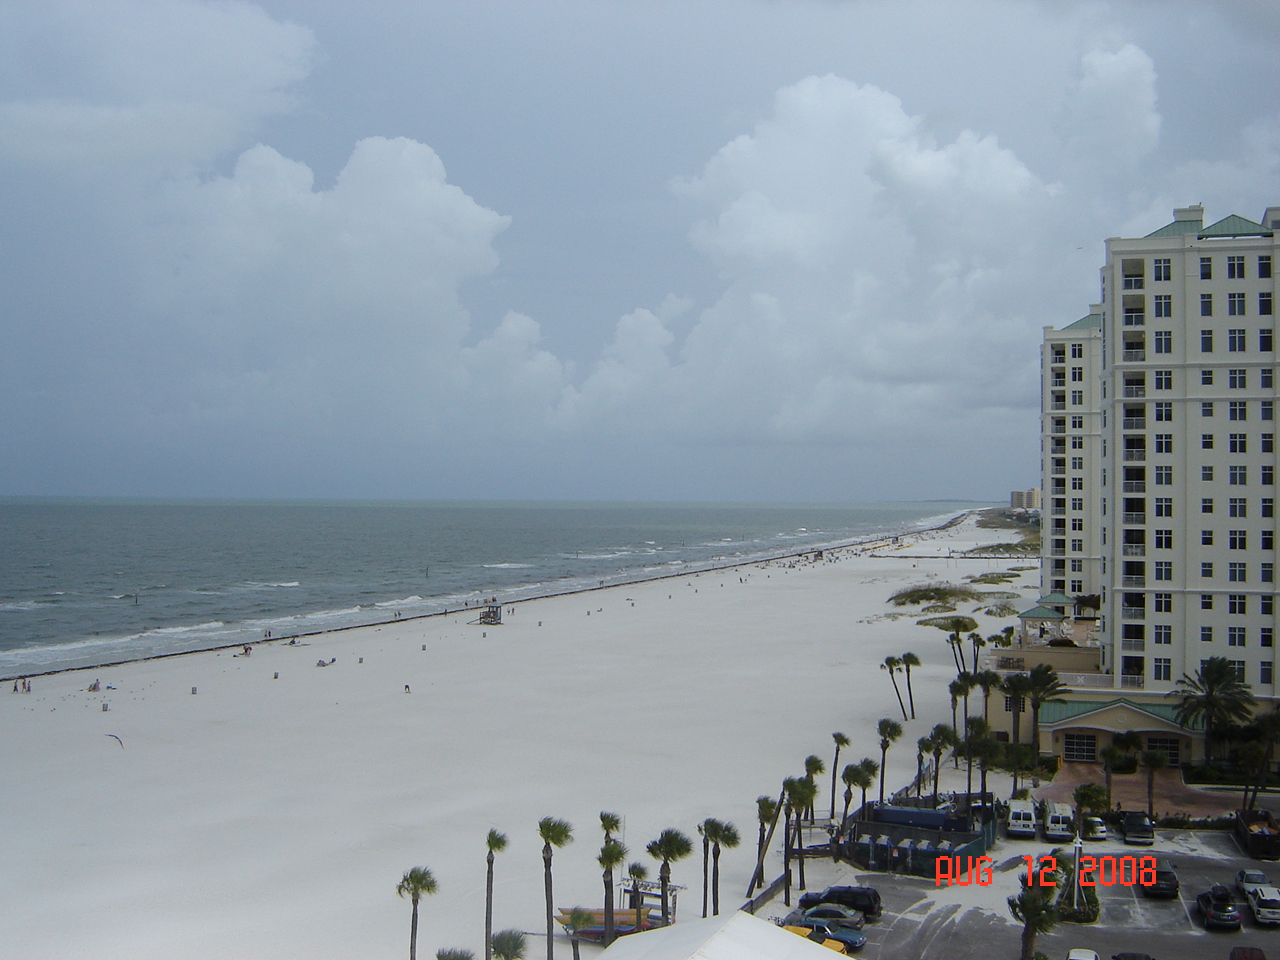 Download this The View From Our Room Hilton Resort Clearwater Beach picture